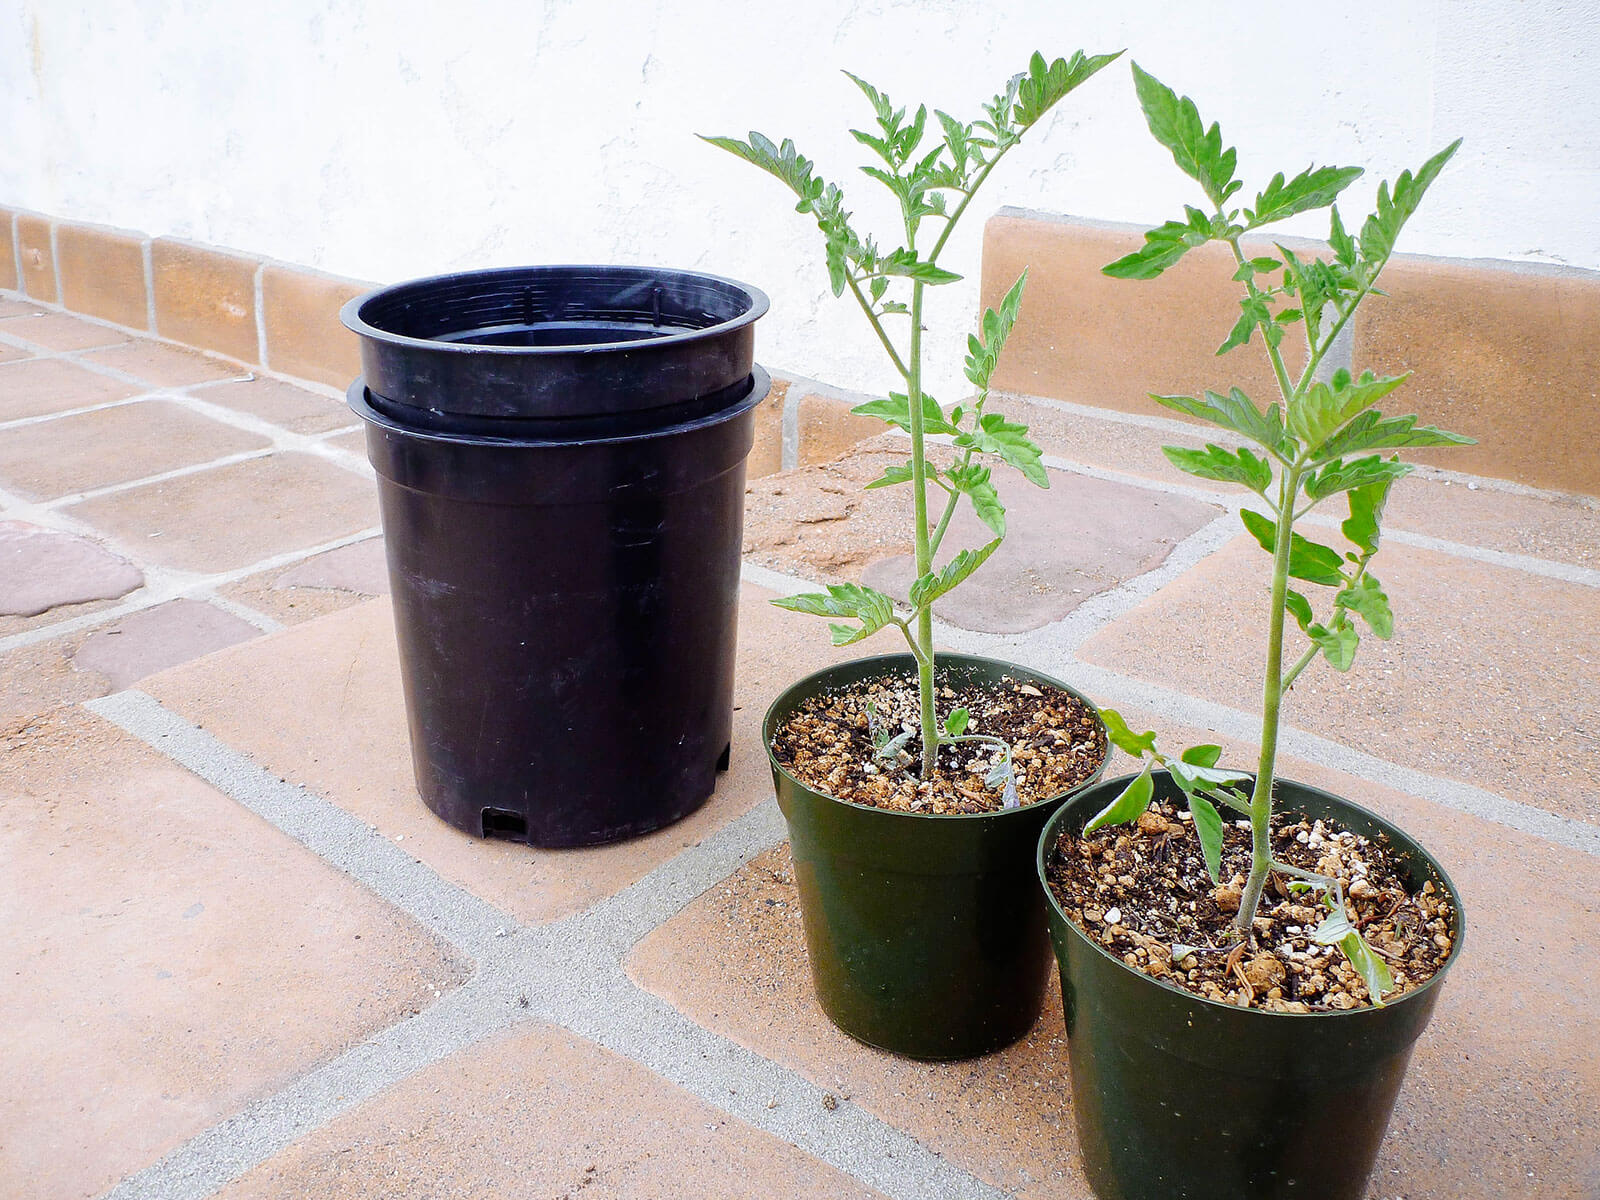 Tomato plants in 4-inch pots, along with 1-gallon pots